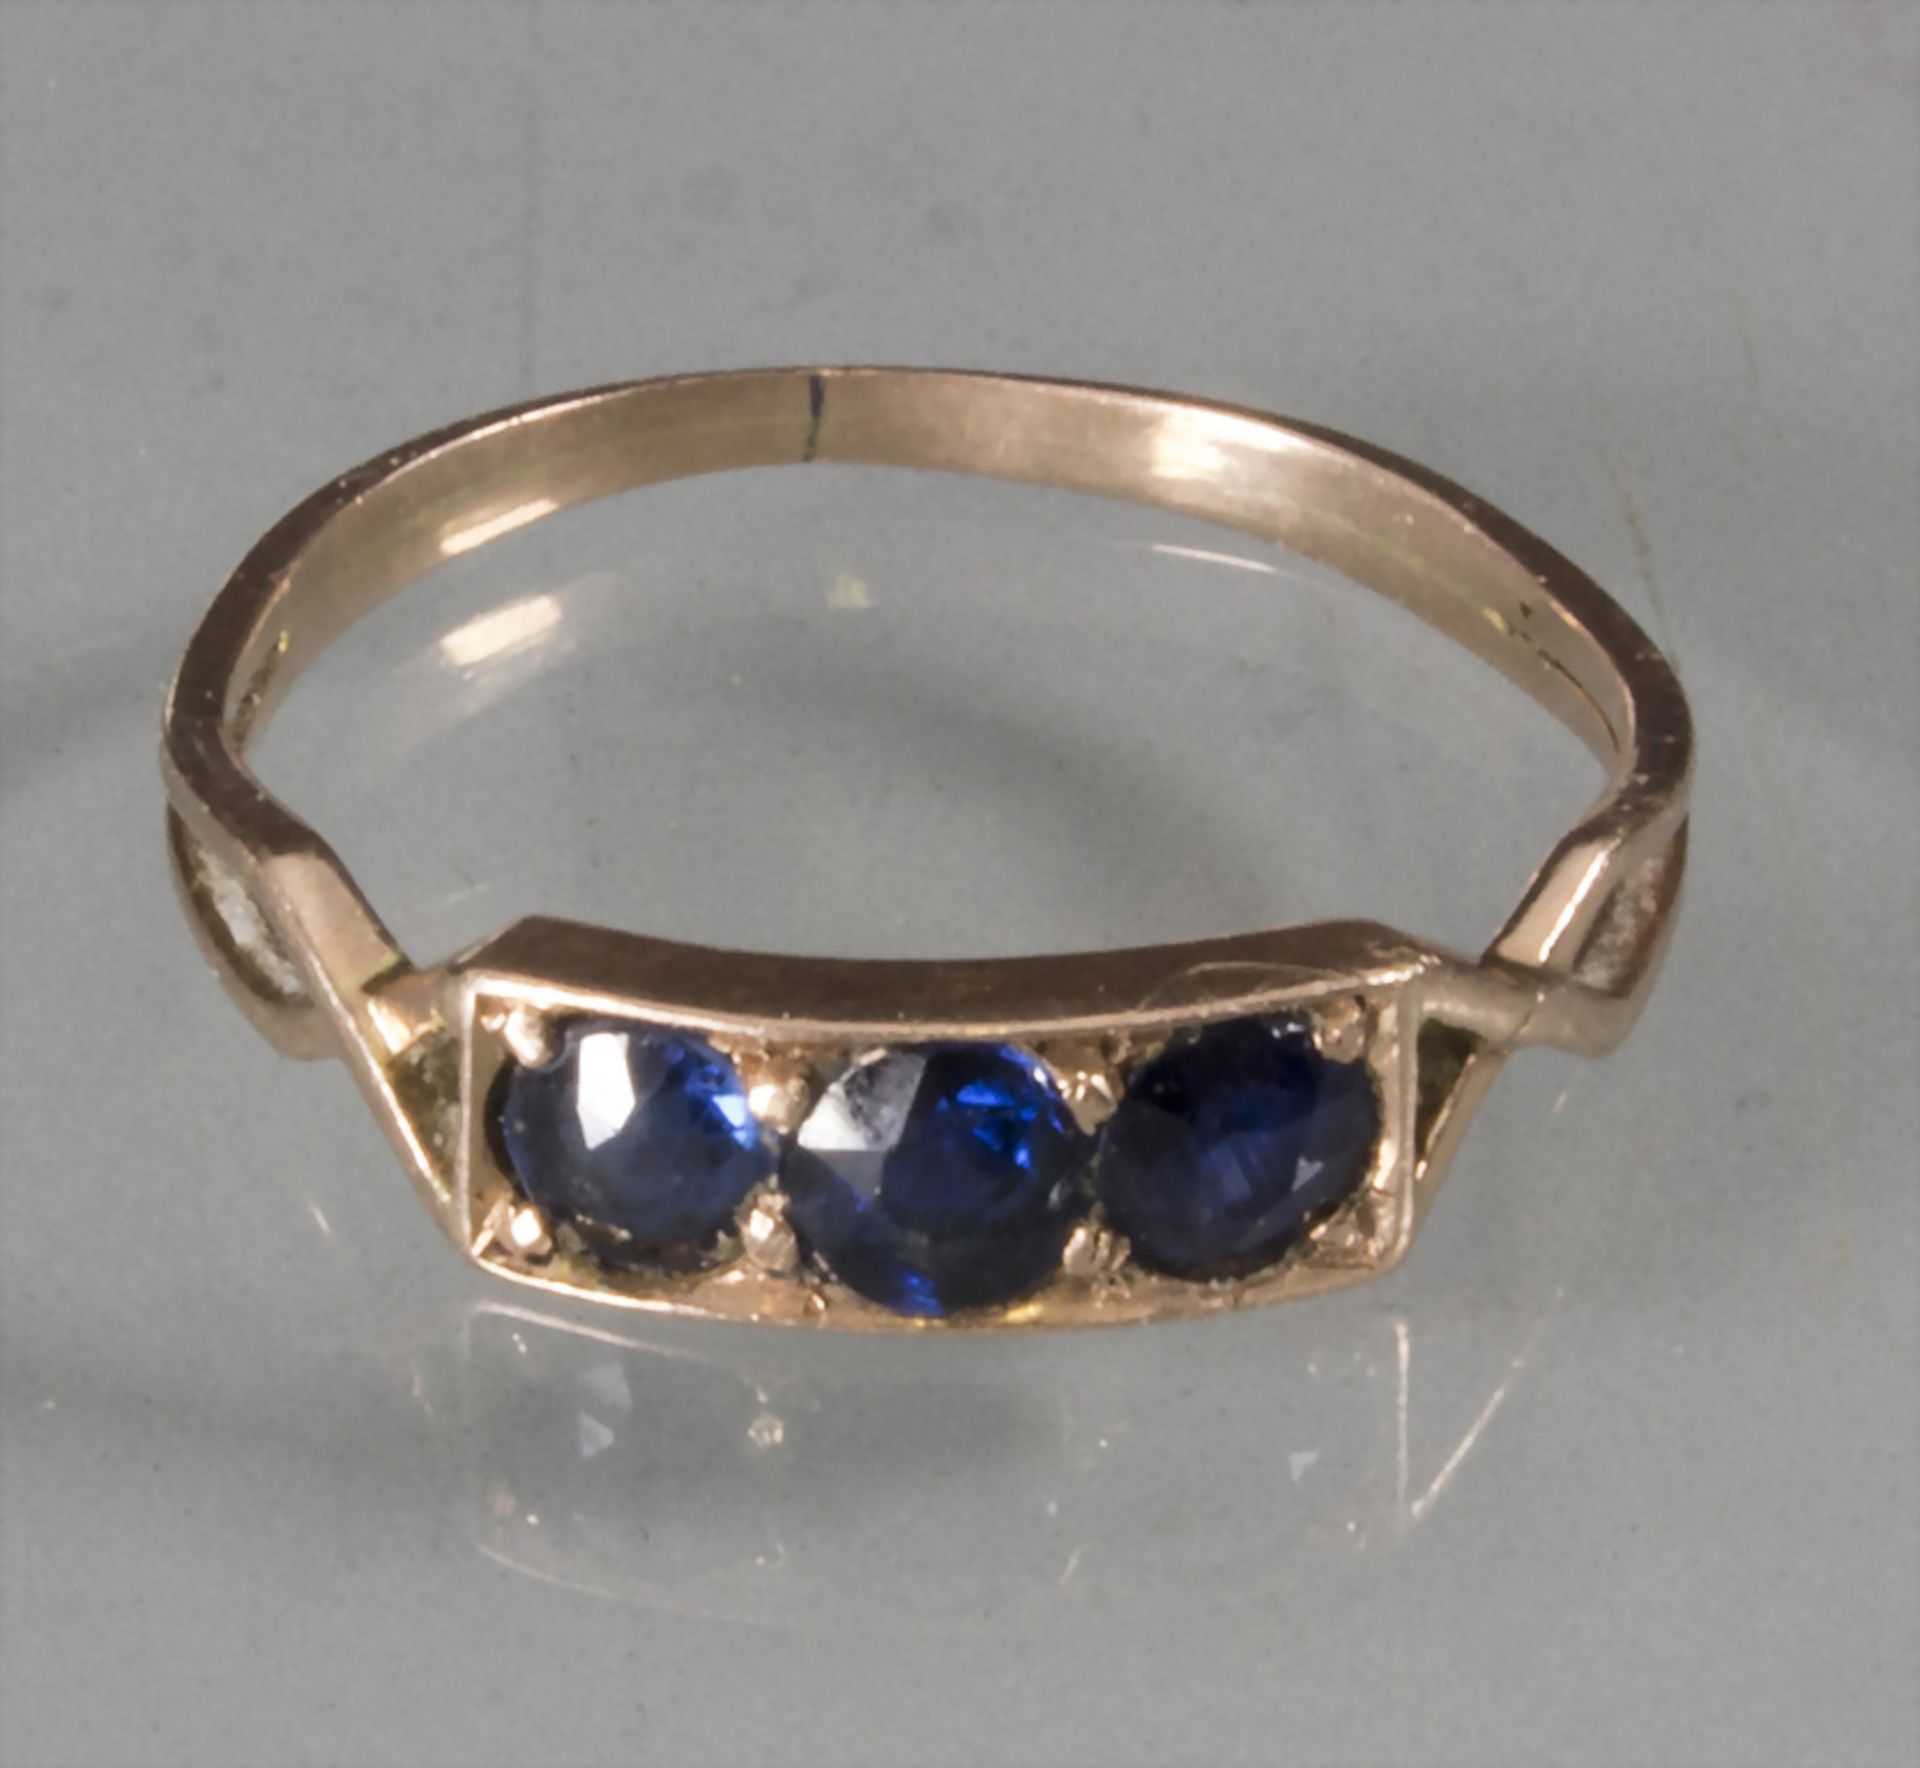 Goldring mit Saphiren / A ladies 14ct gold ring with sapphires